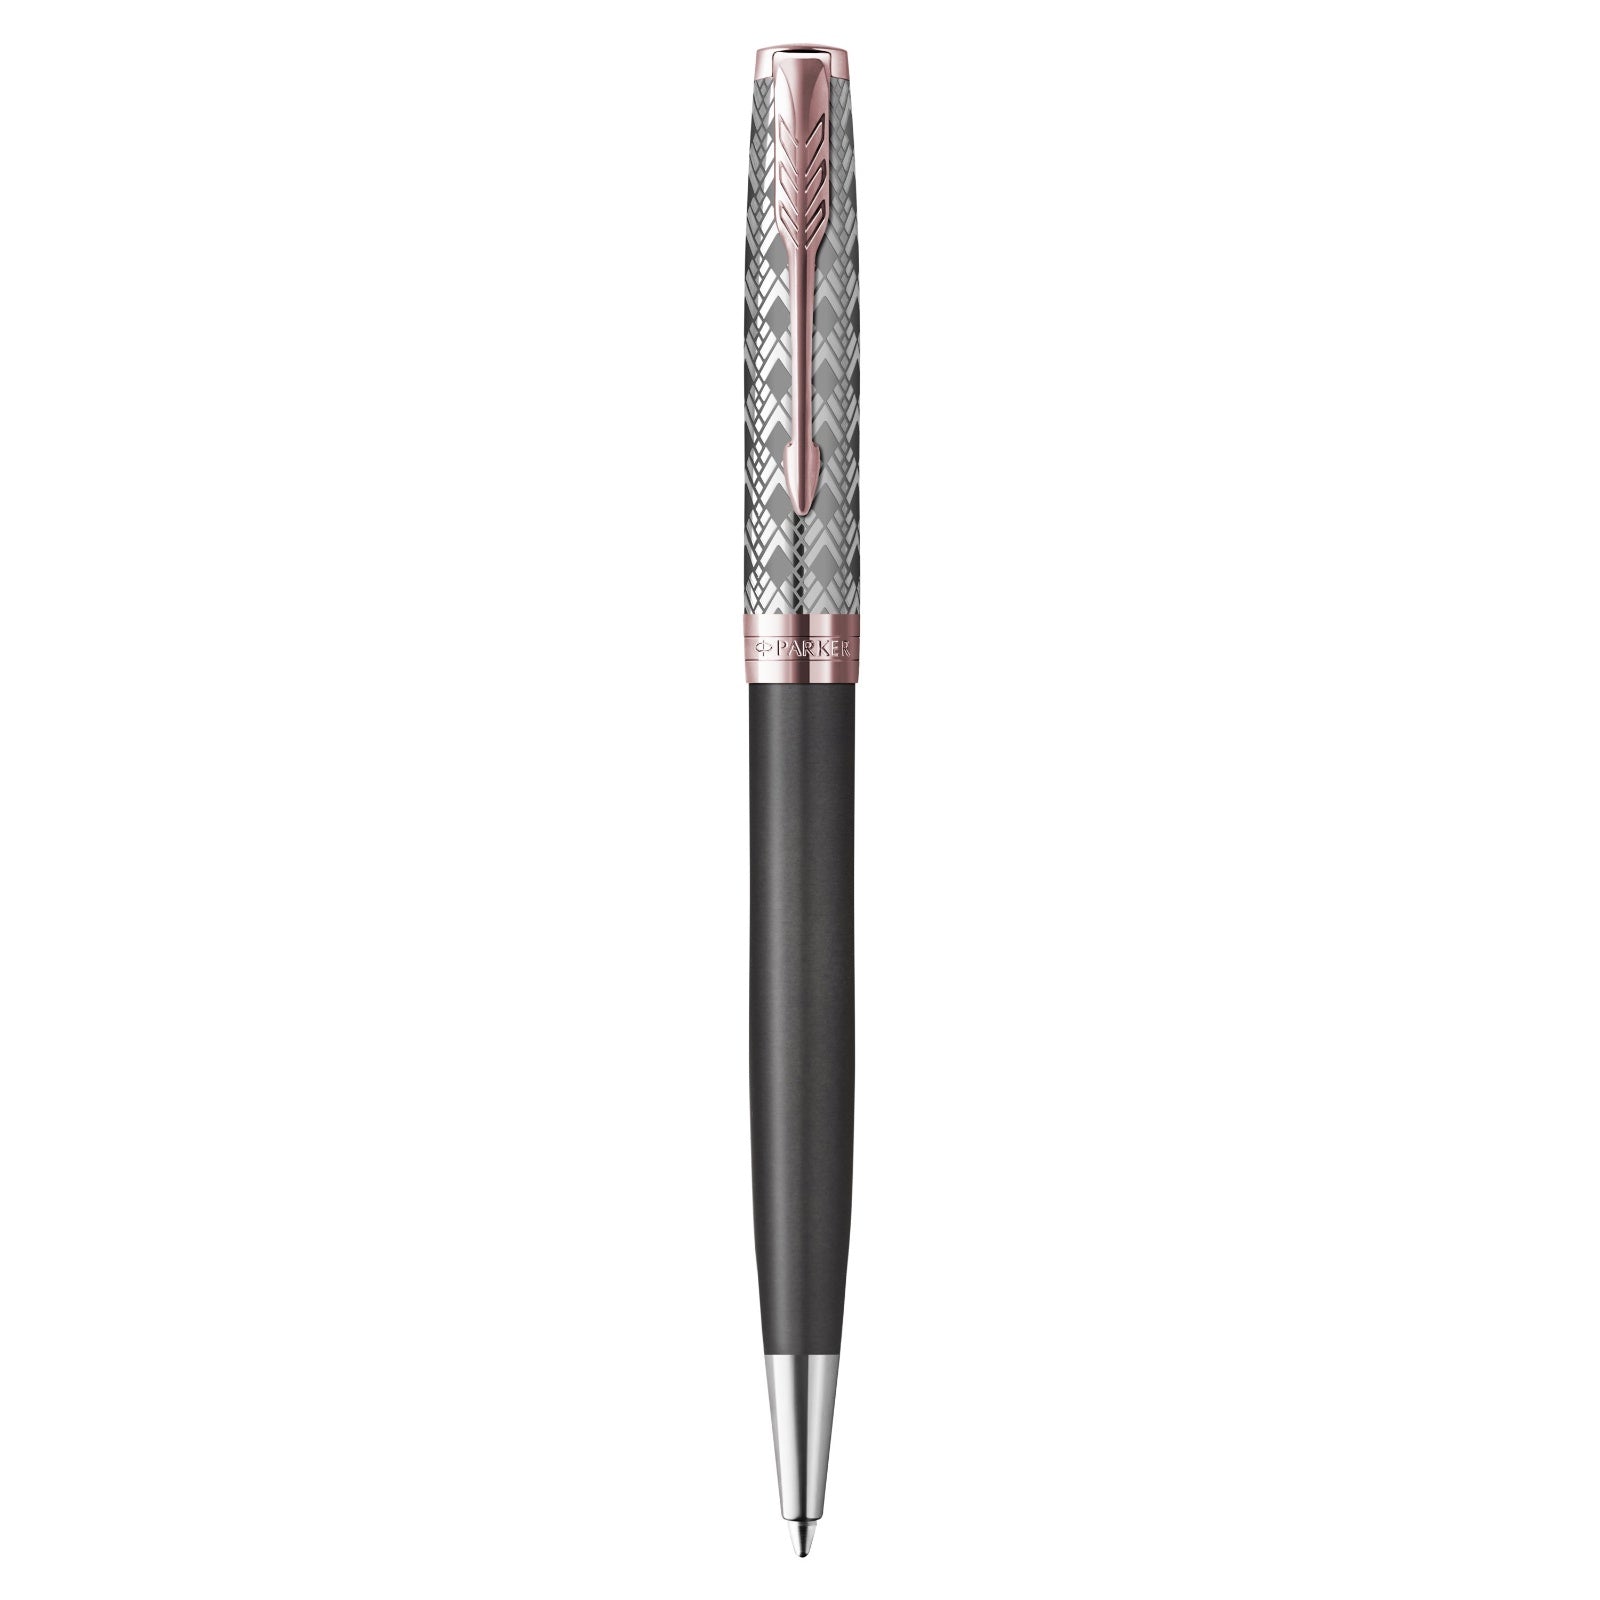 Parker Sonnet Metal and Grey Pink Gold Trim Ballpoint - Pencraft the boutique